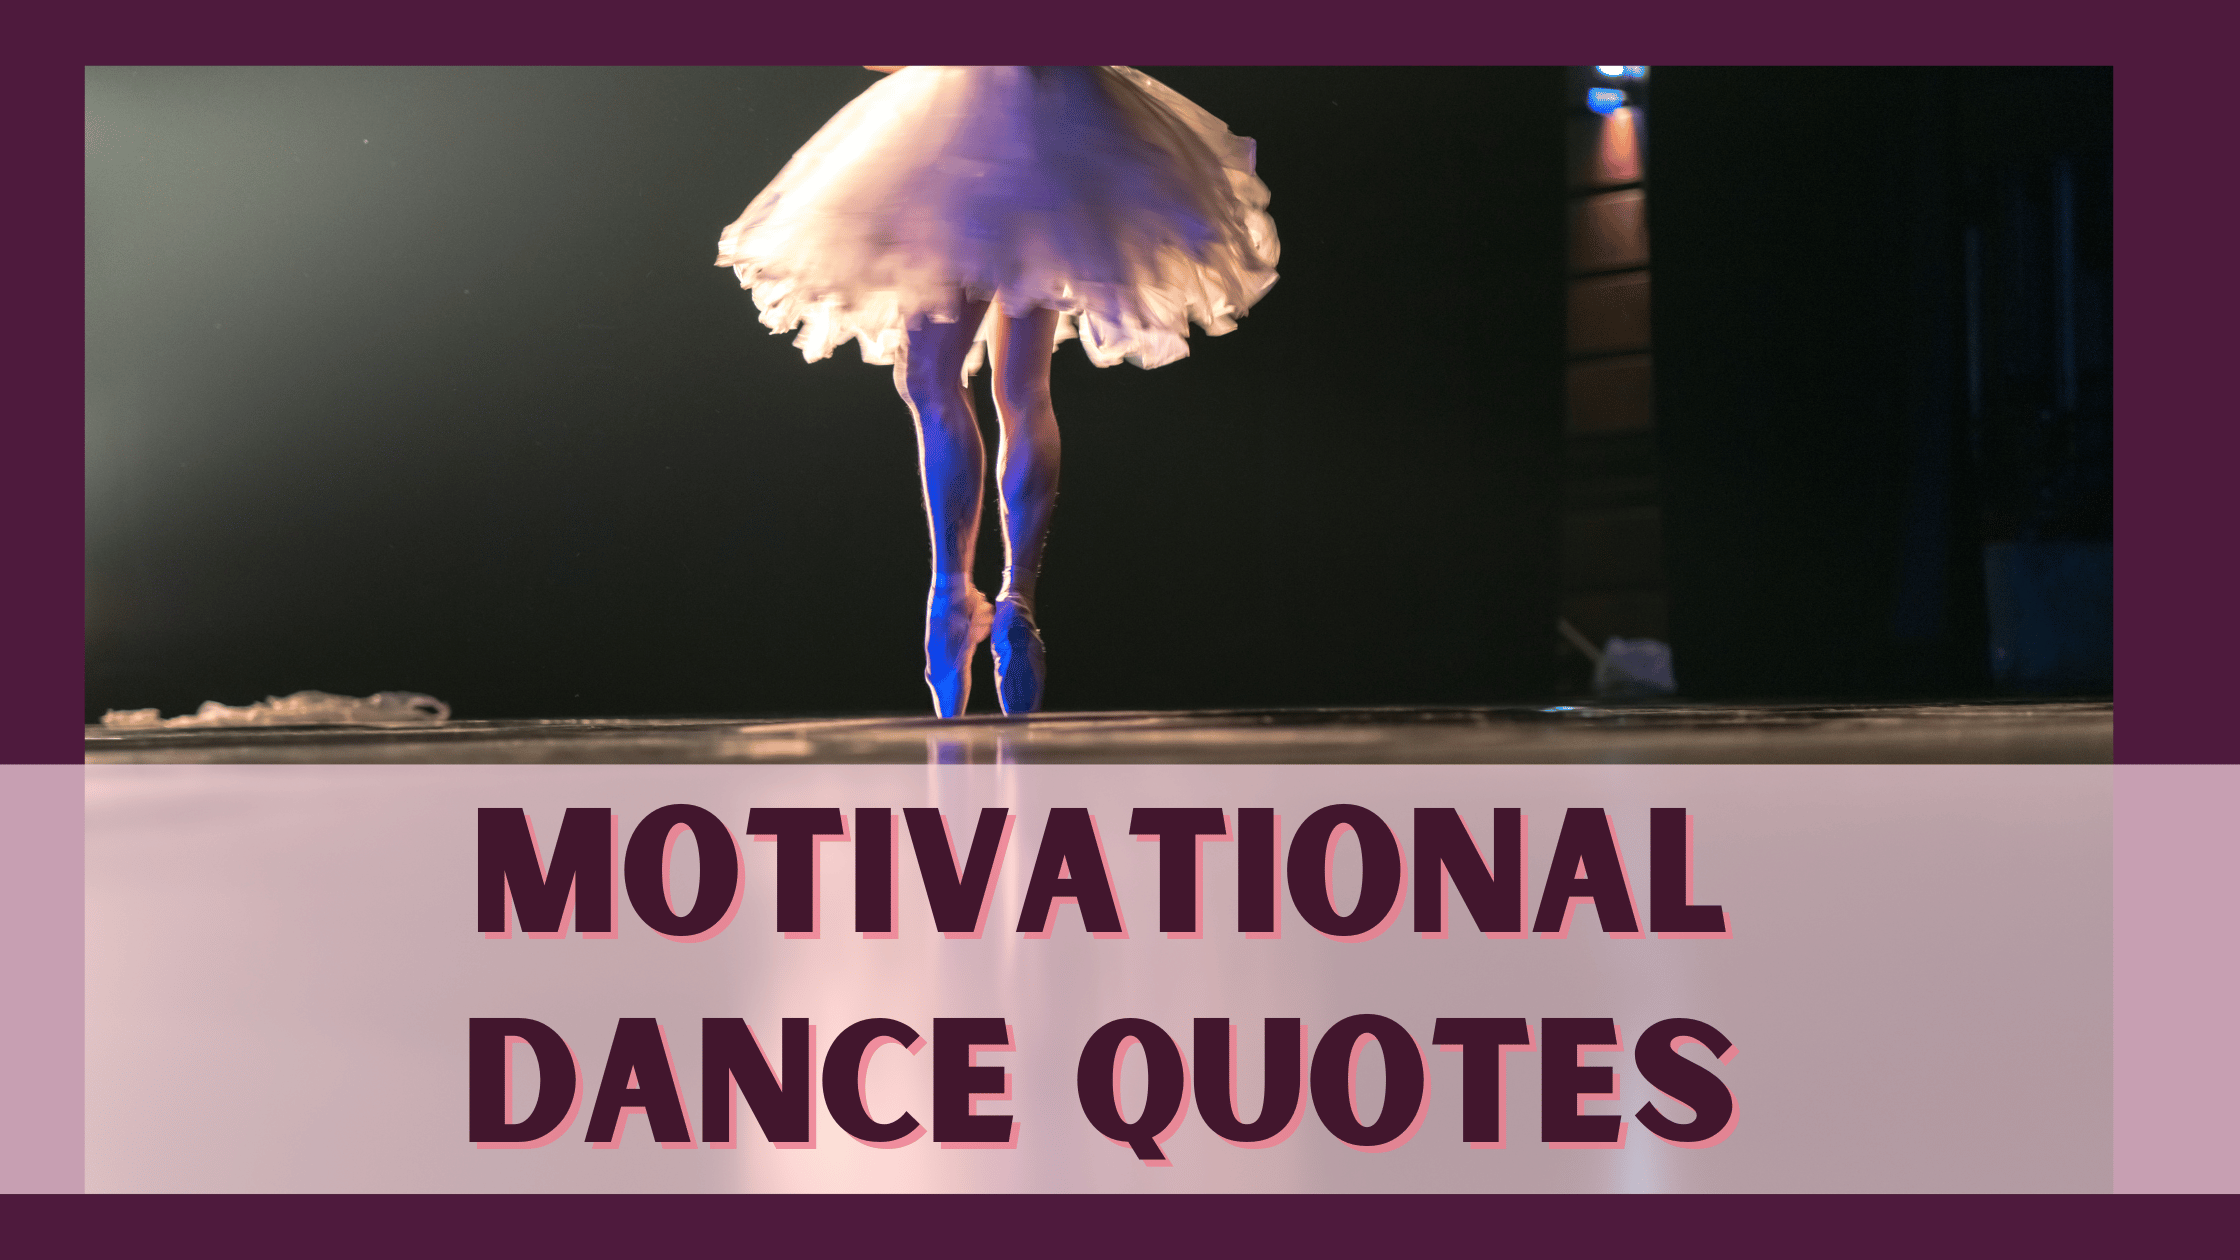 Motivational Dance Quotes | 40 AMAZING Quotes to Live By